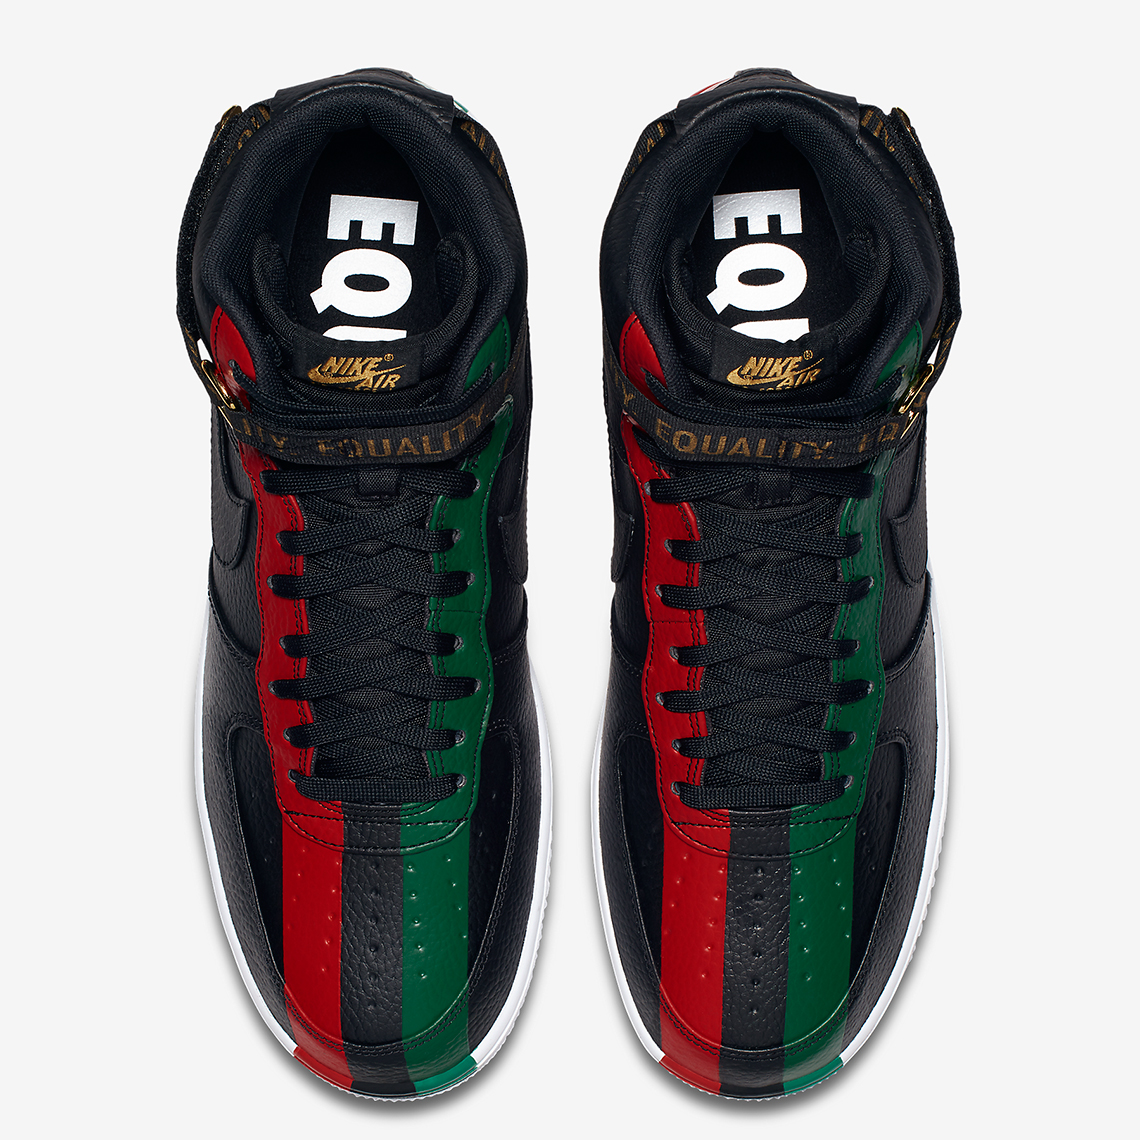 Nike Air Force 1 High Bhm 836227 002 Official Images 8